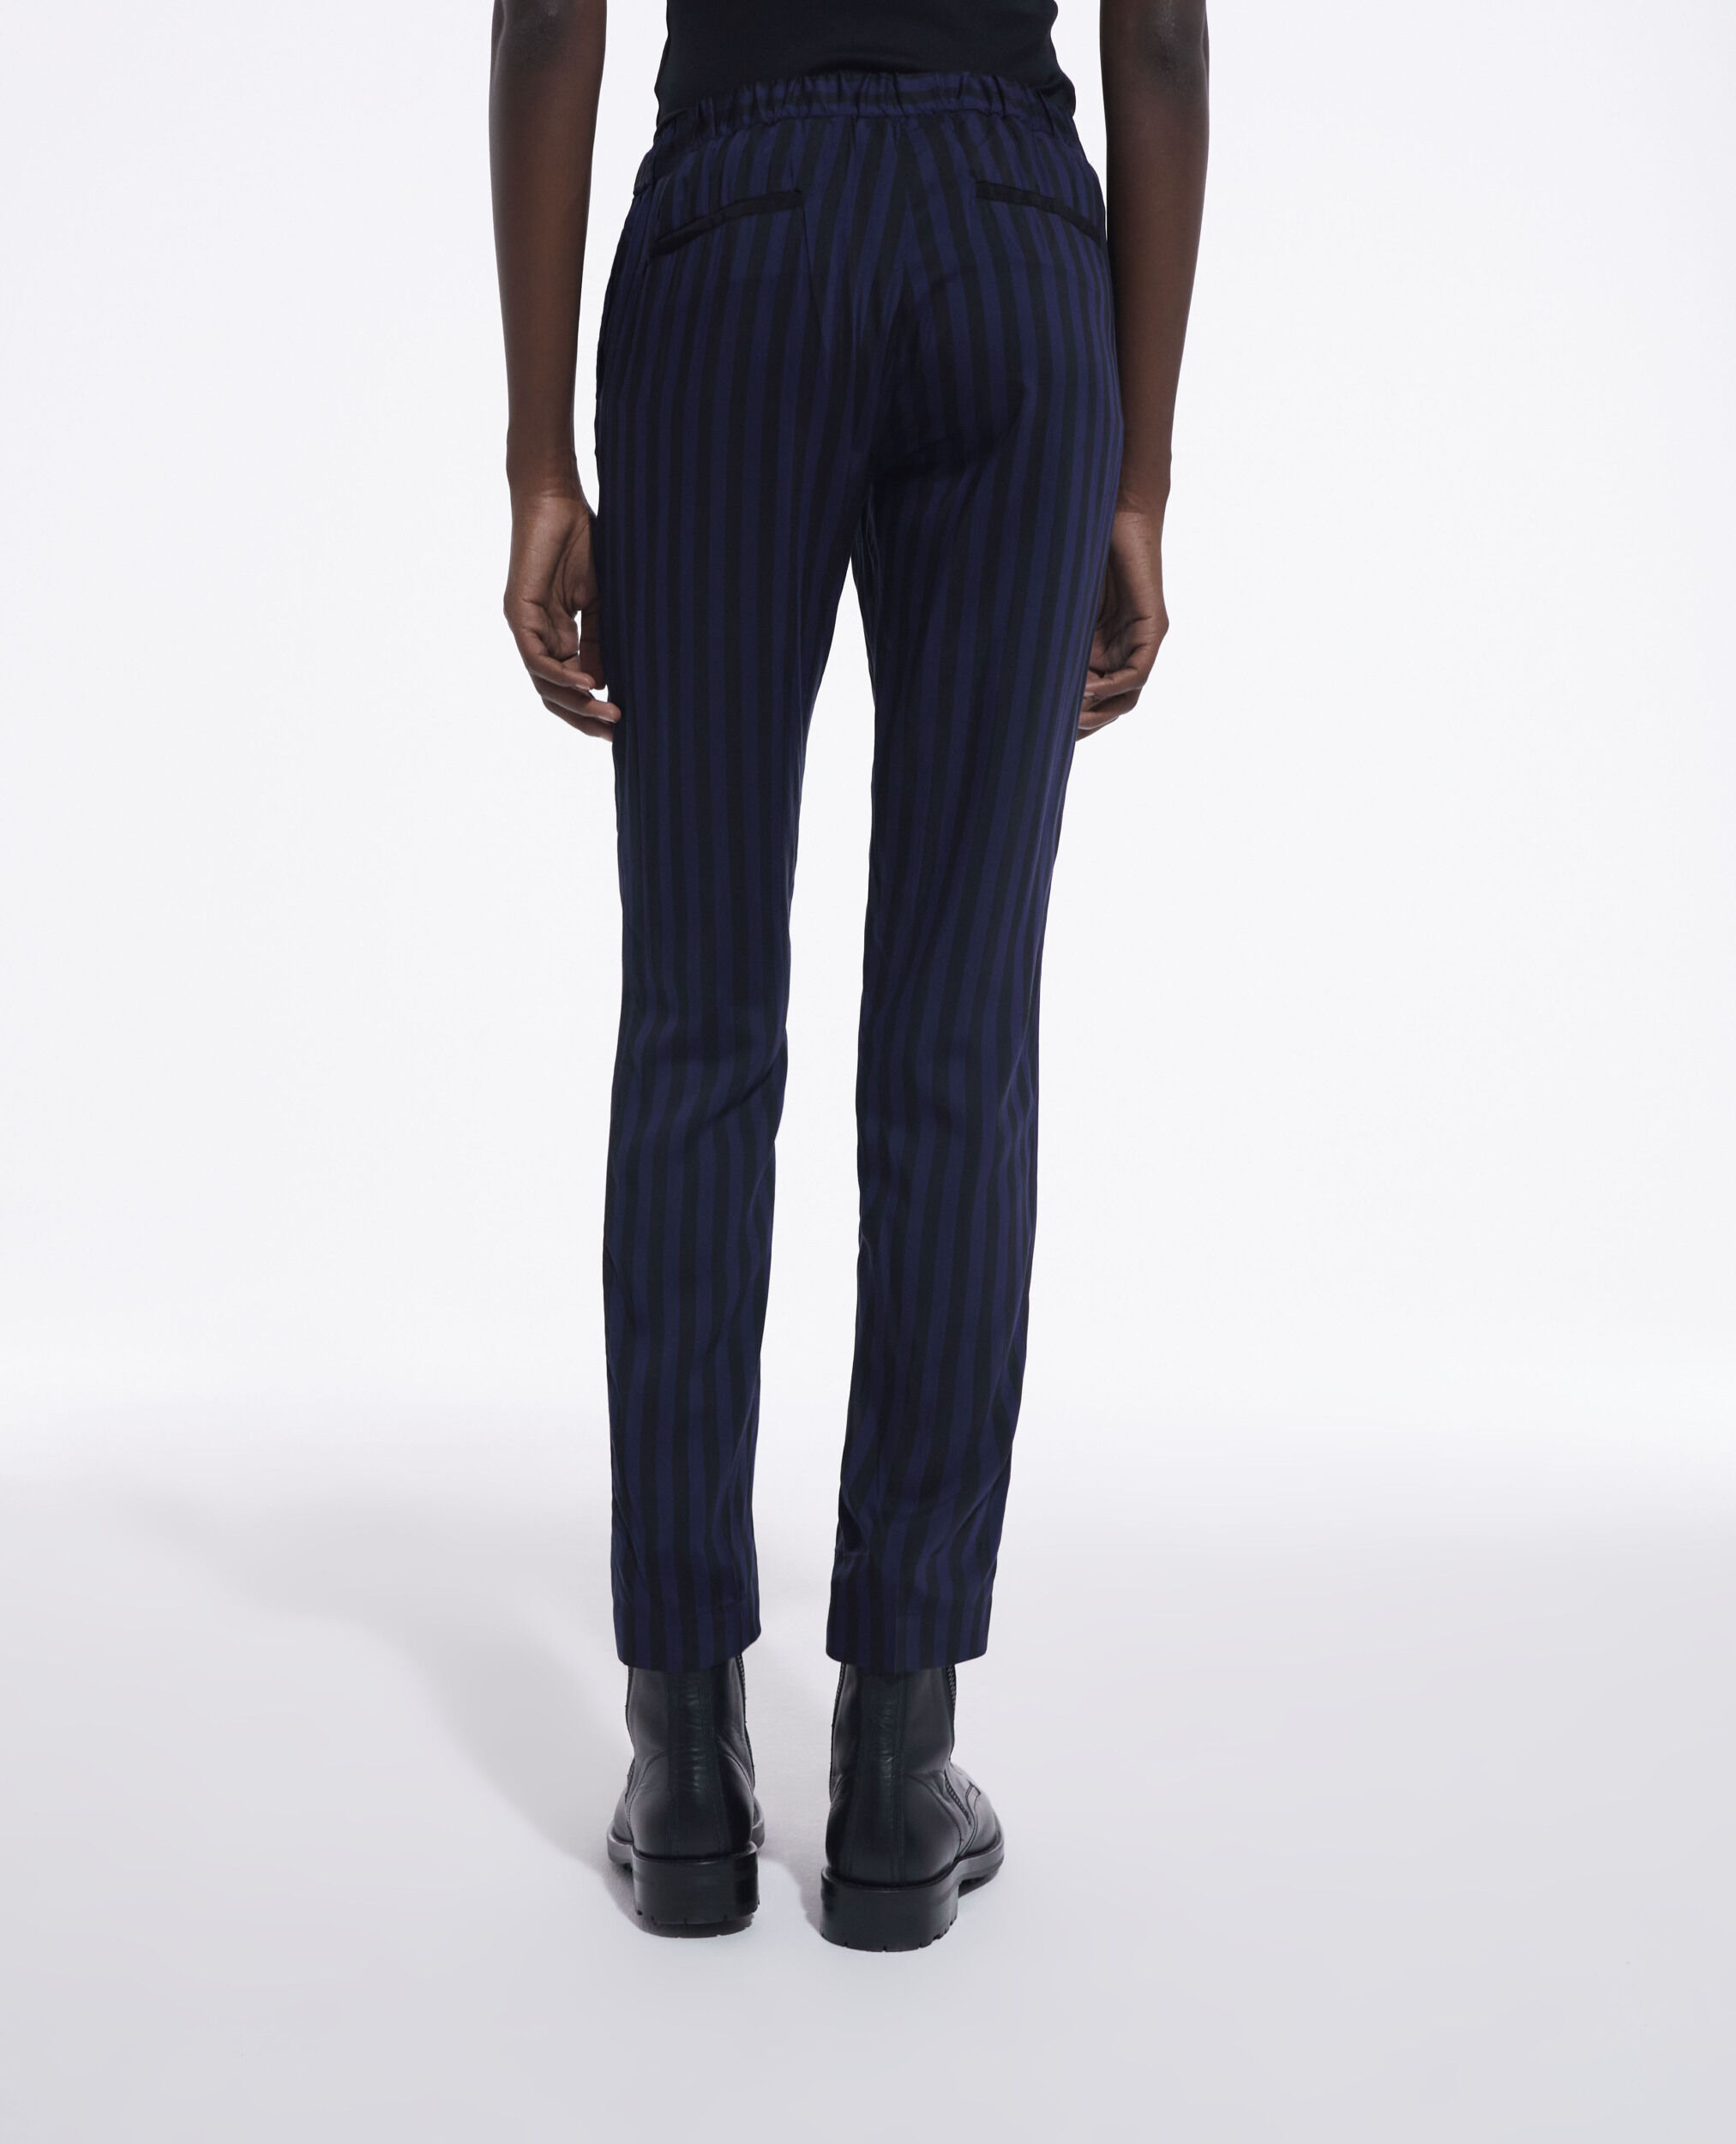 Straight-cut striped pants, BLACK NAVY, hi-res image number null